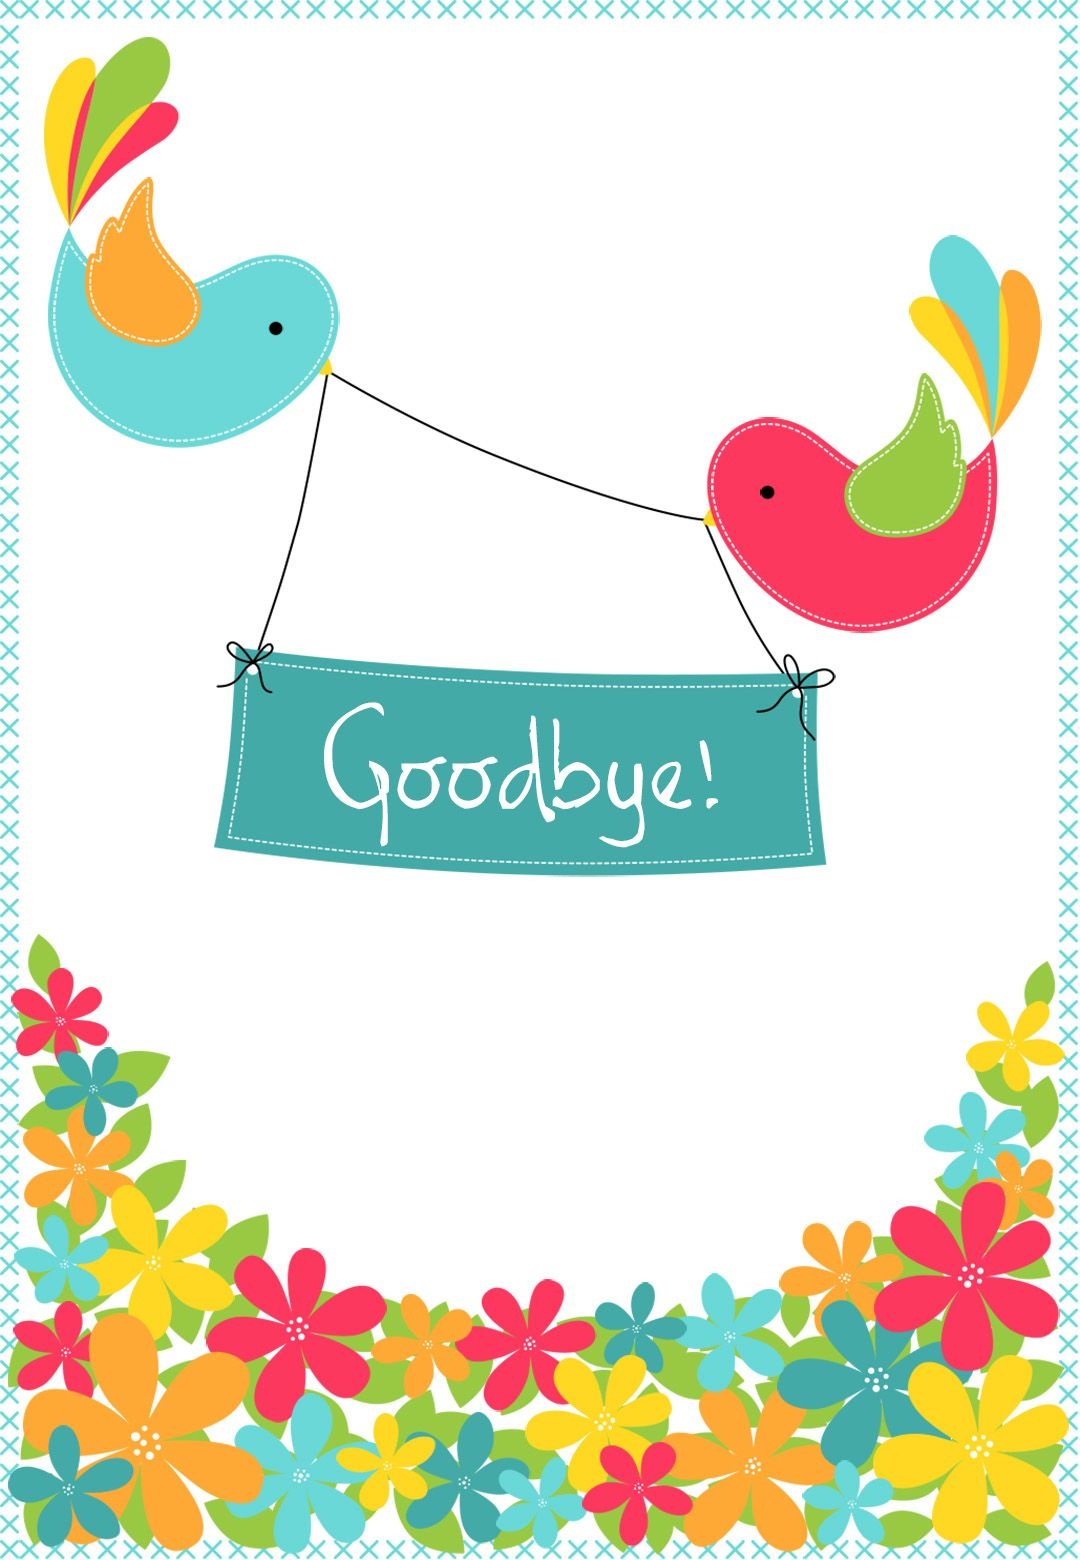 Goodbye From Your Colleagues - Free Good Luck Card | Greetings - Free Printable Goodbye Cards